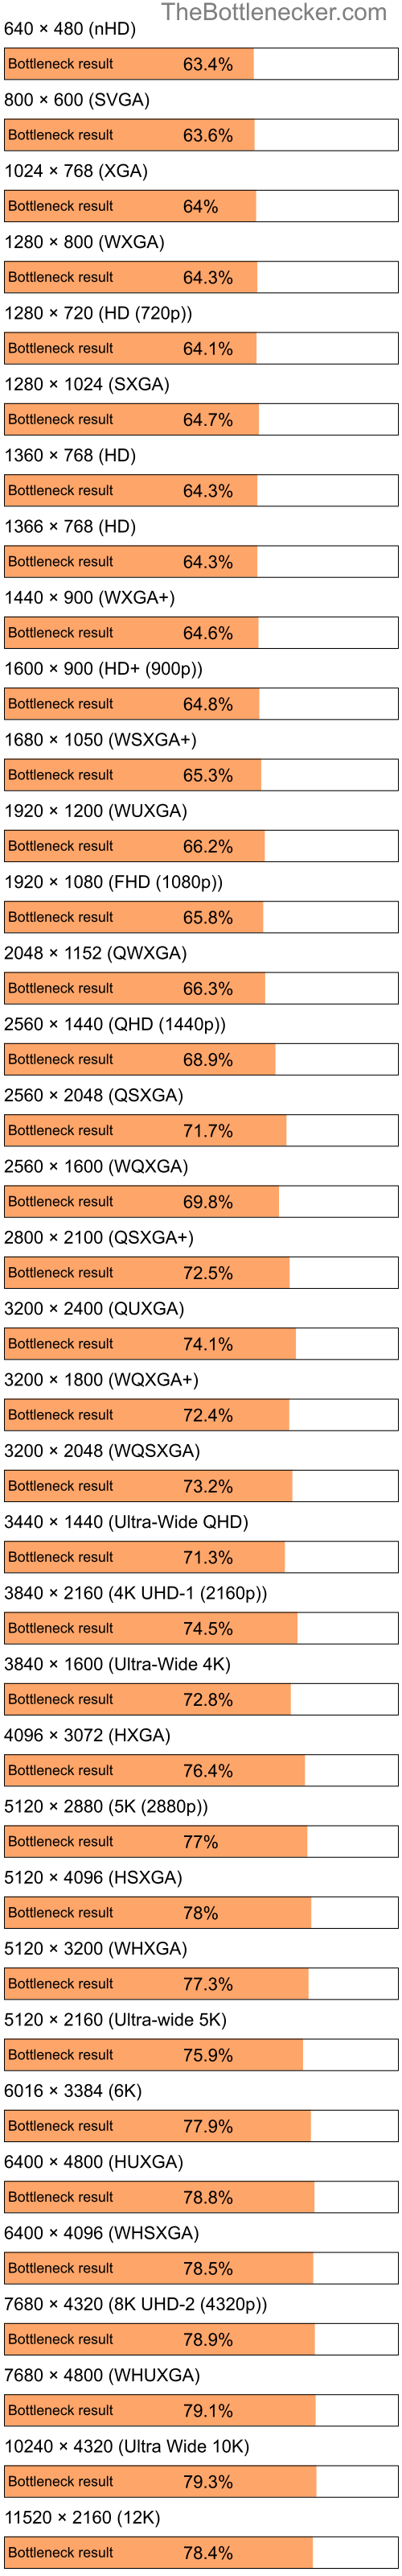 Bottleneck results by resolution for Intel Celeron M and AMD Mobility Radeon X1600 in General Tasks